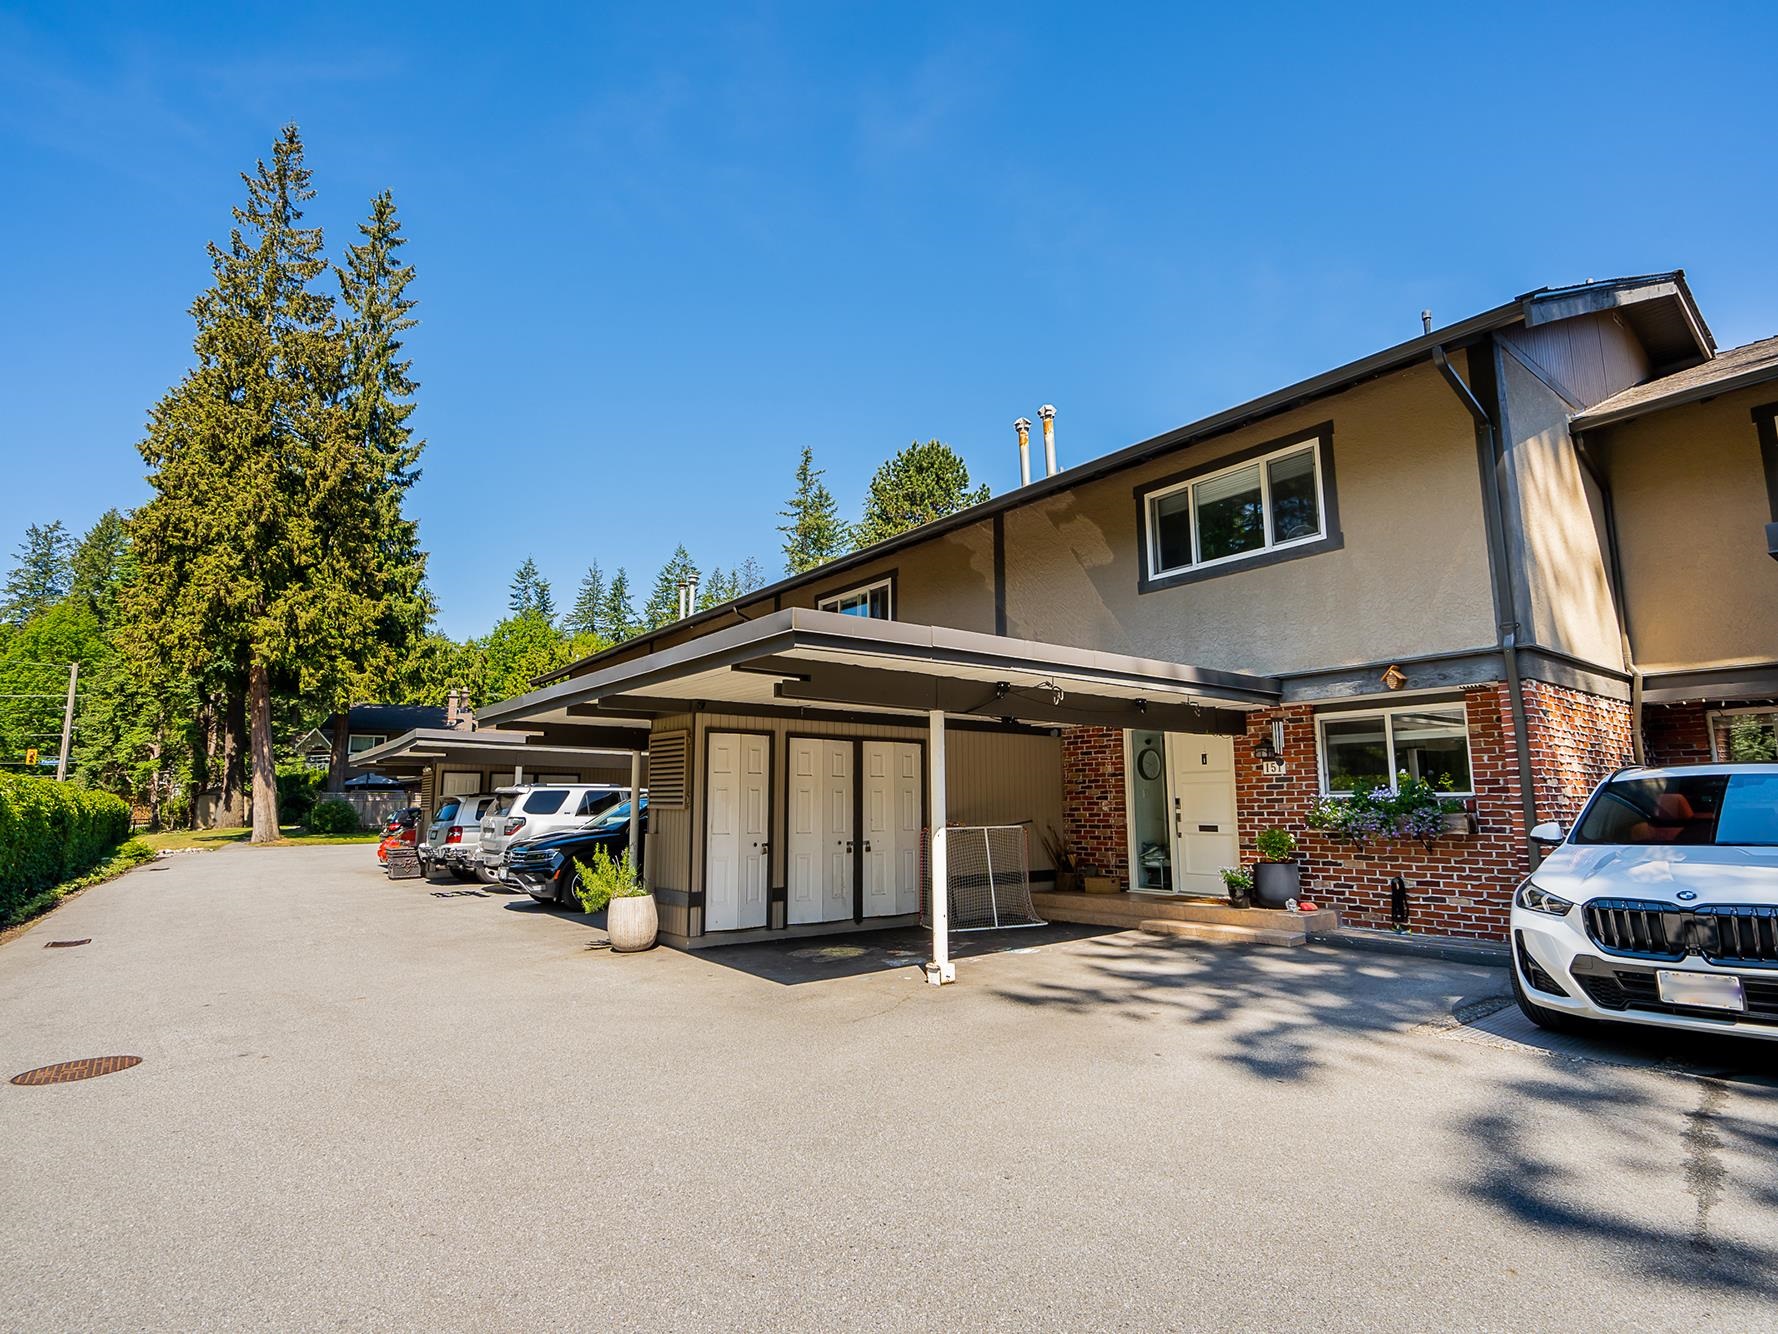 Listing image of 148 3300 CAPILANO ROAD